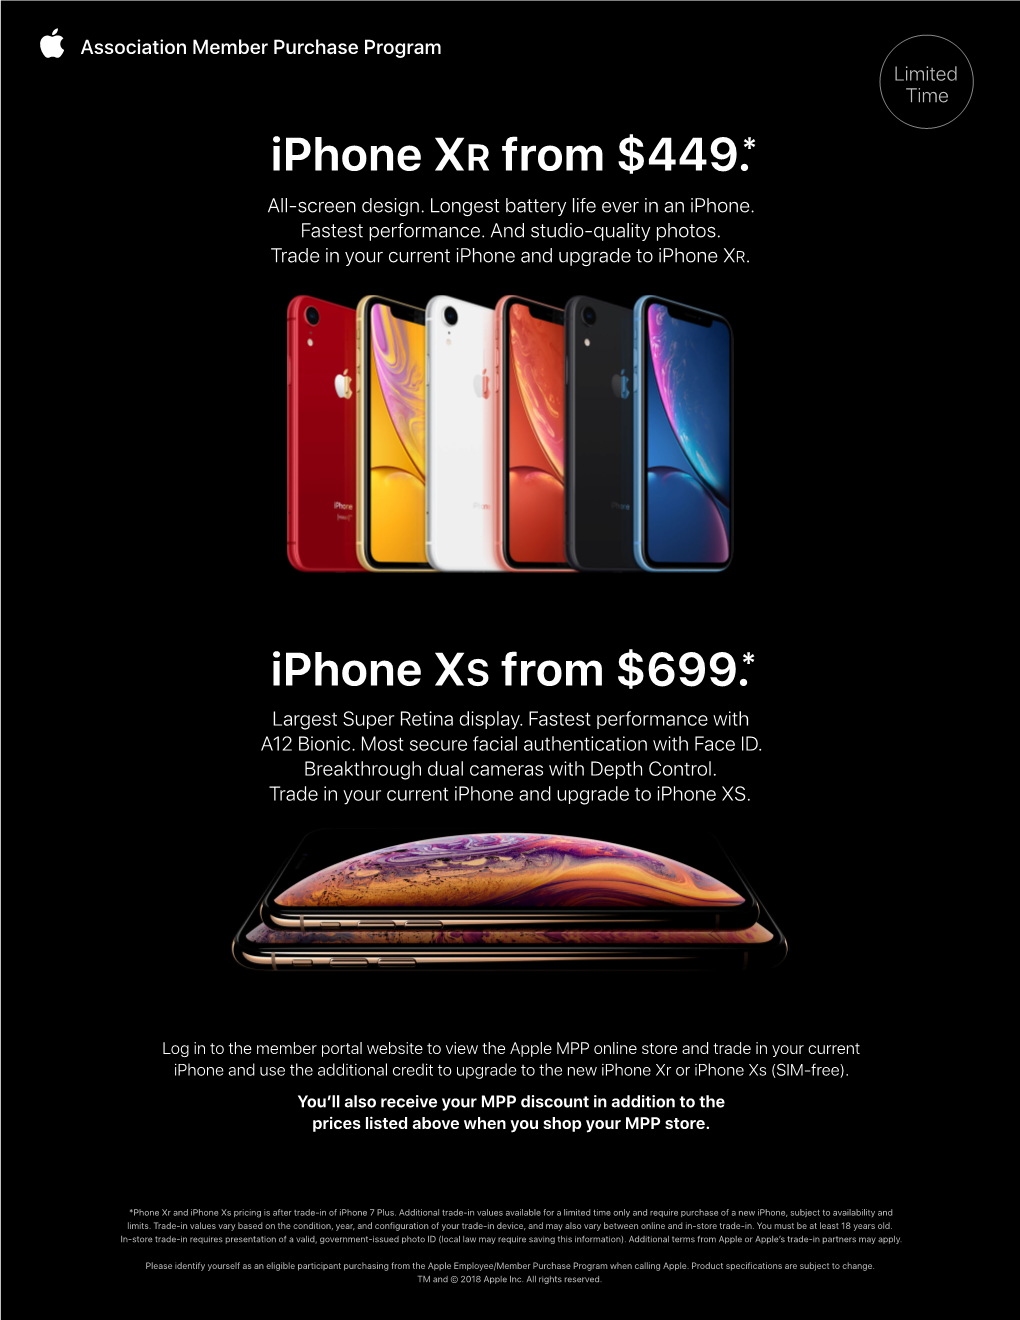 Iphone XR from $449.* Iphone XS from $699.*